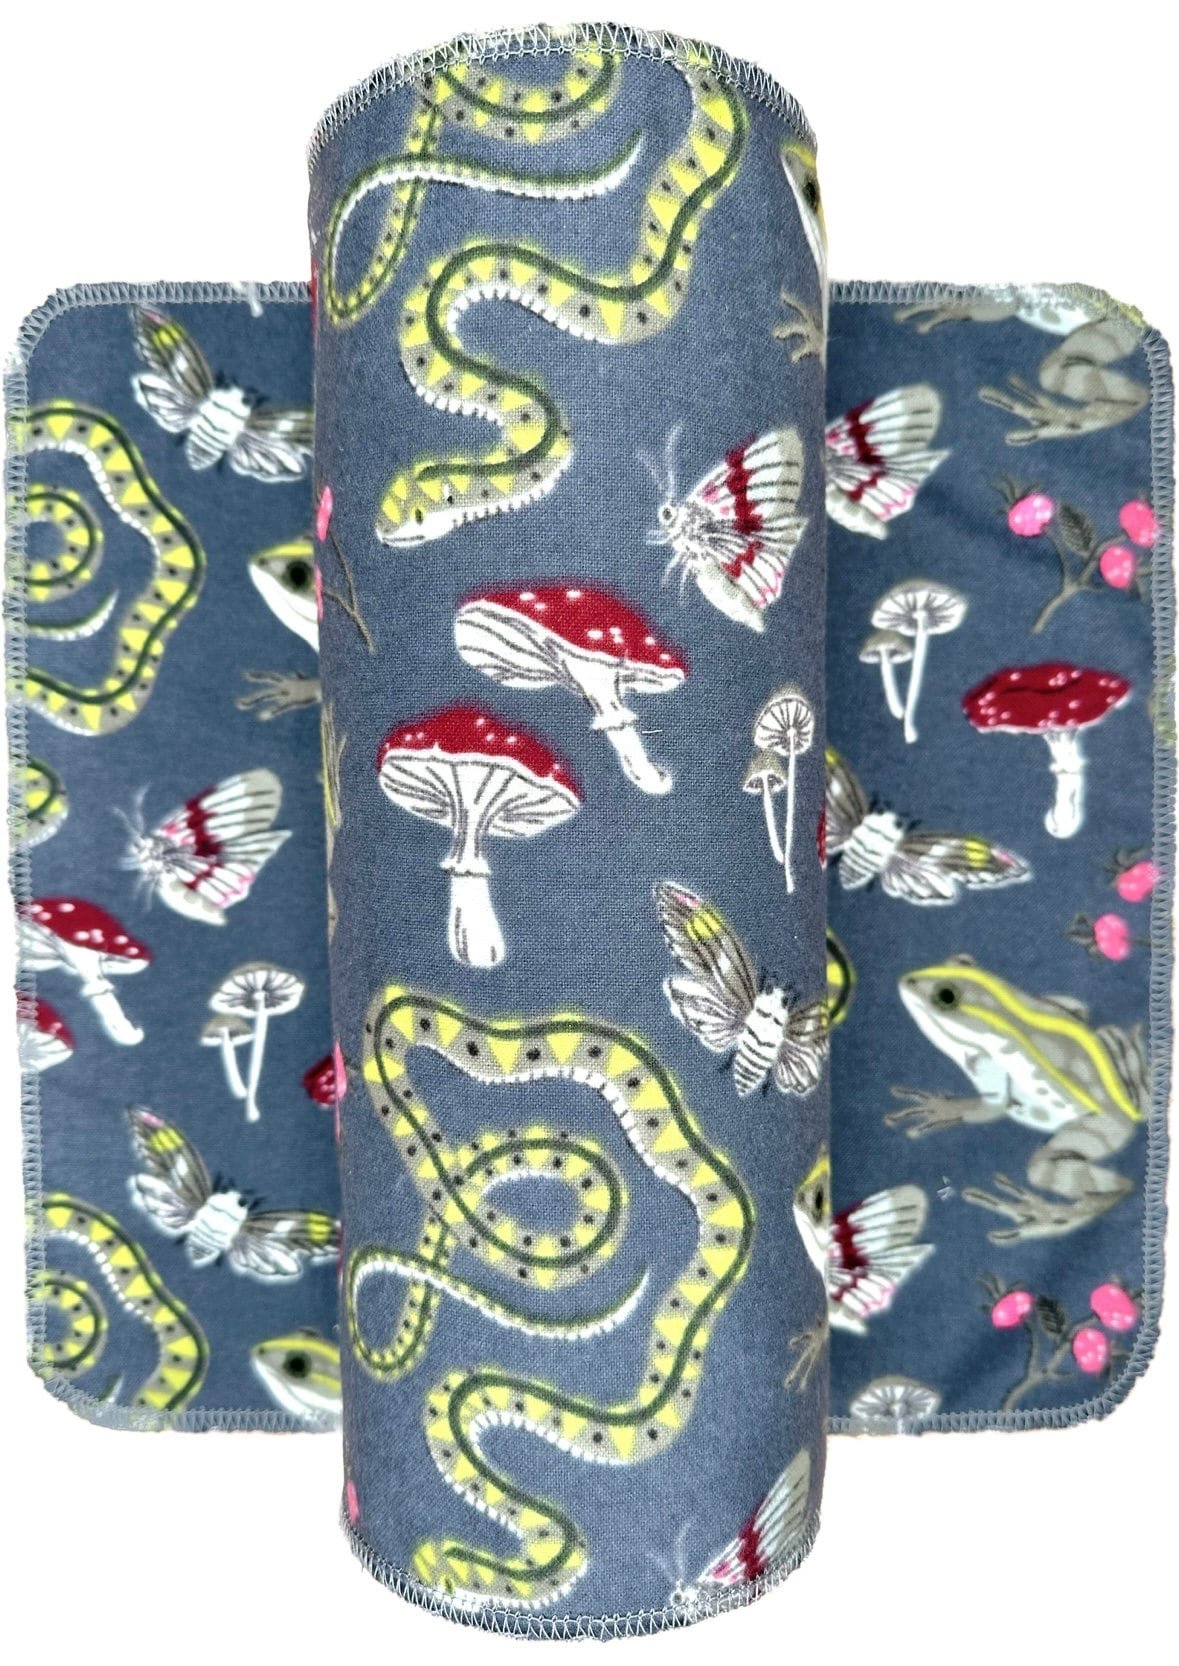 Frogs • Snakes & Mushrooms Paperless Towels || Unpaper Towels || Eco Sustainable Kitchen